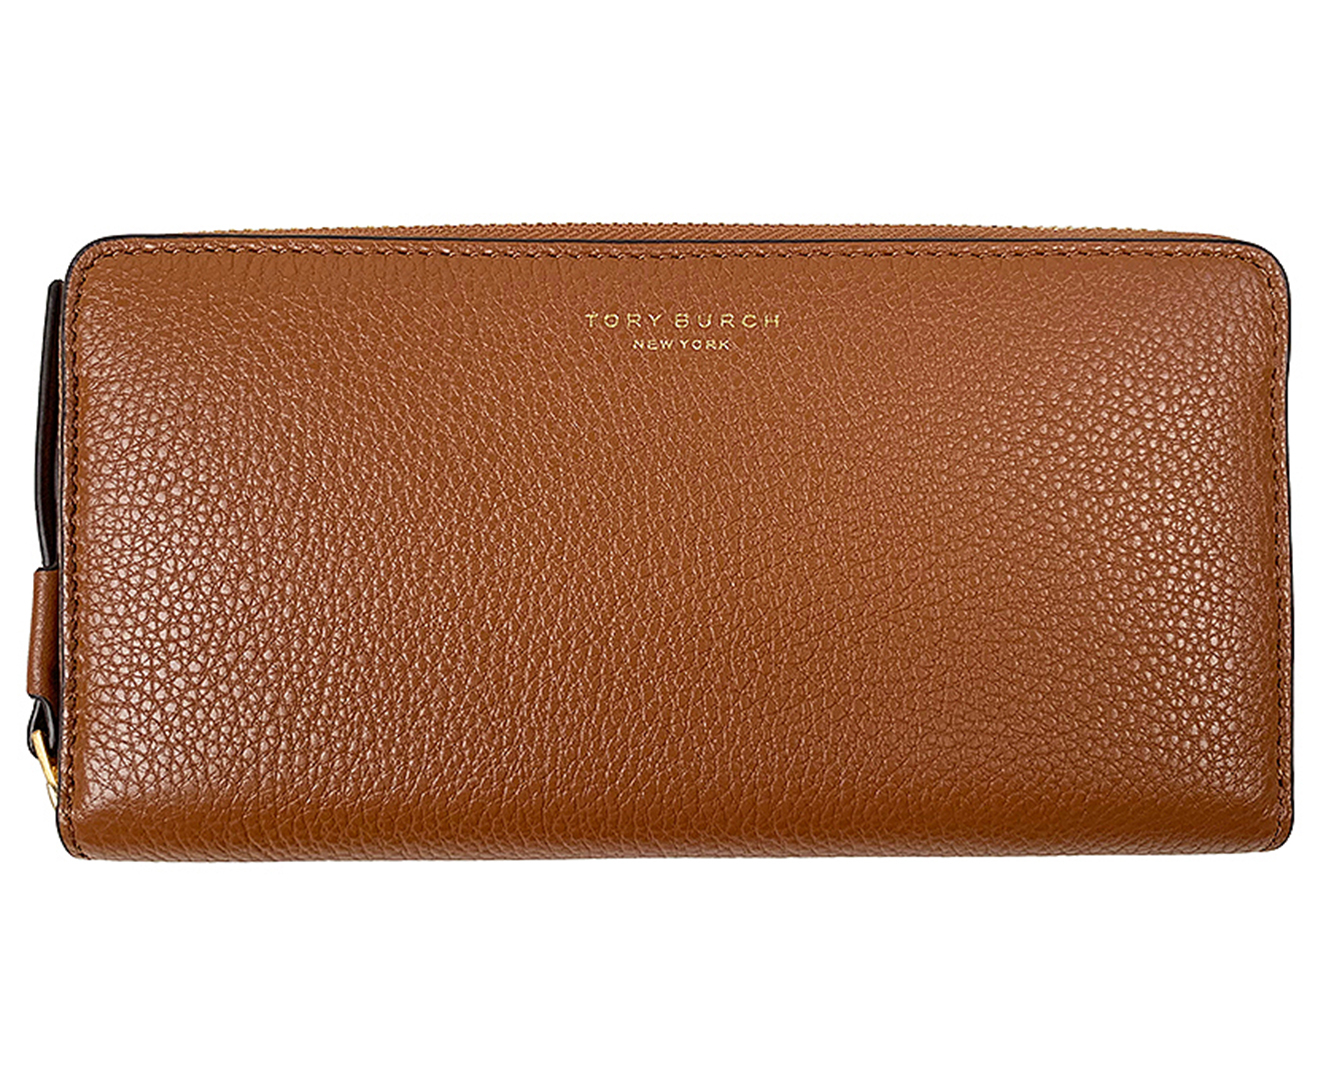 Tory Burch Perry Zip Continental Wallet - Light Umber 